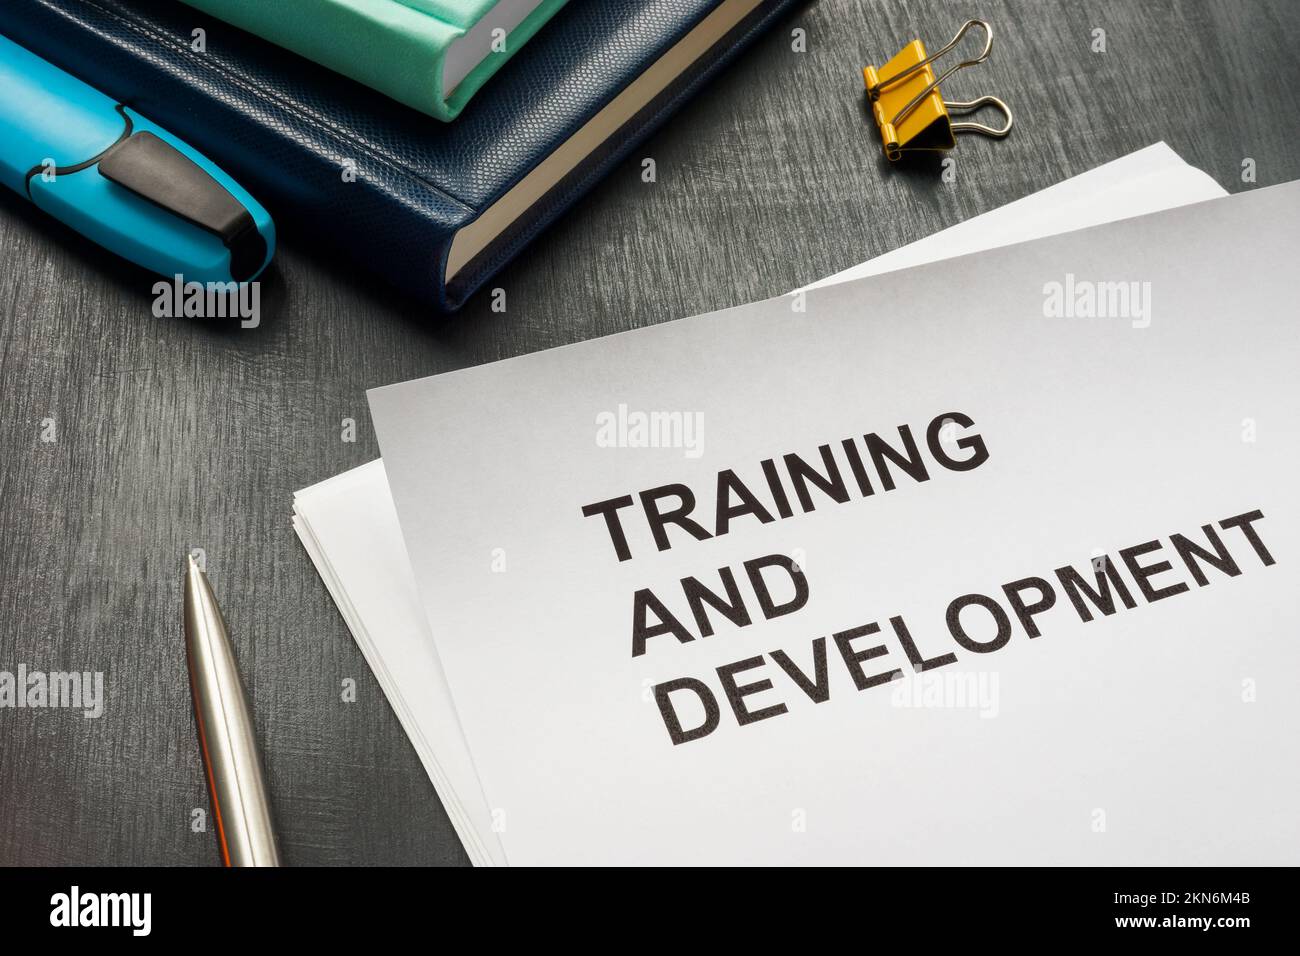 Papers about Training and development on the desk. Stock Photo